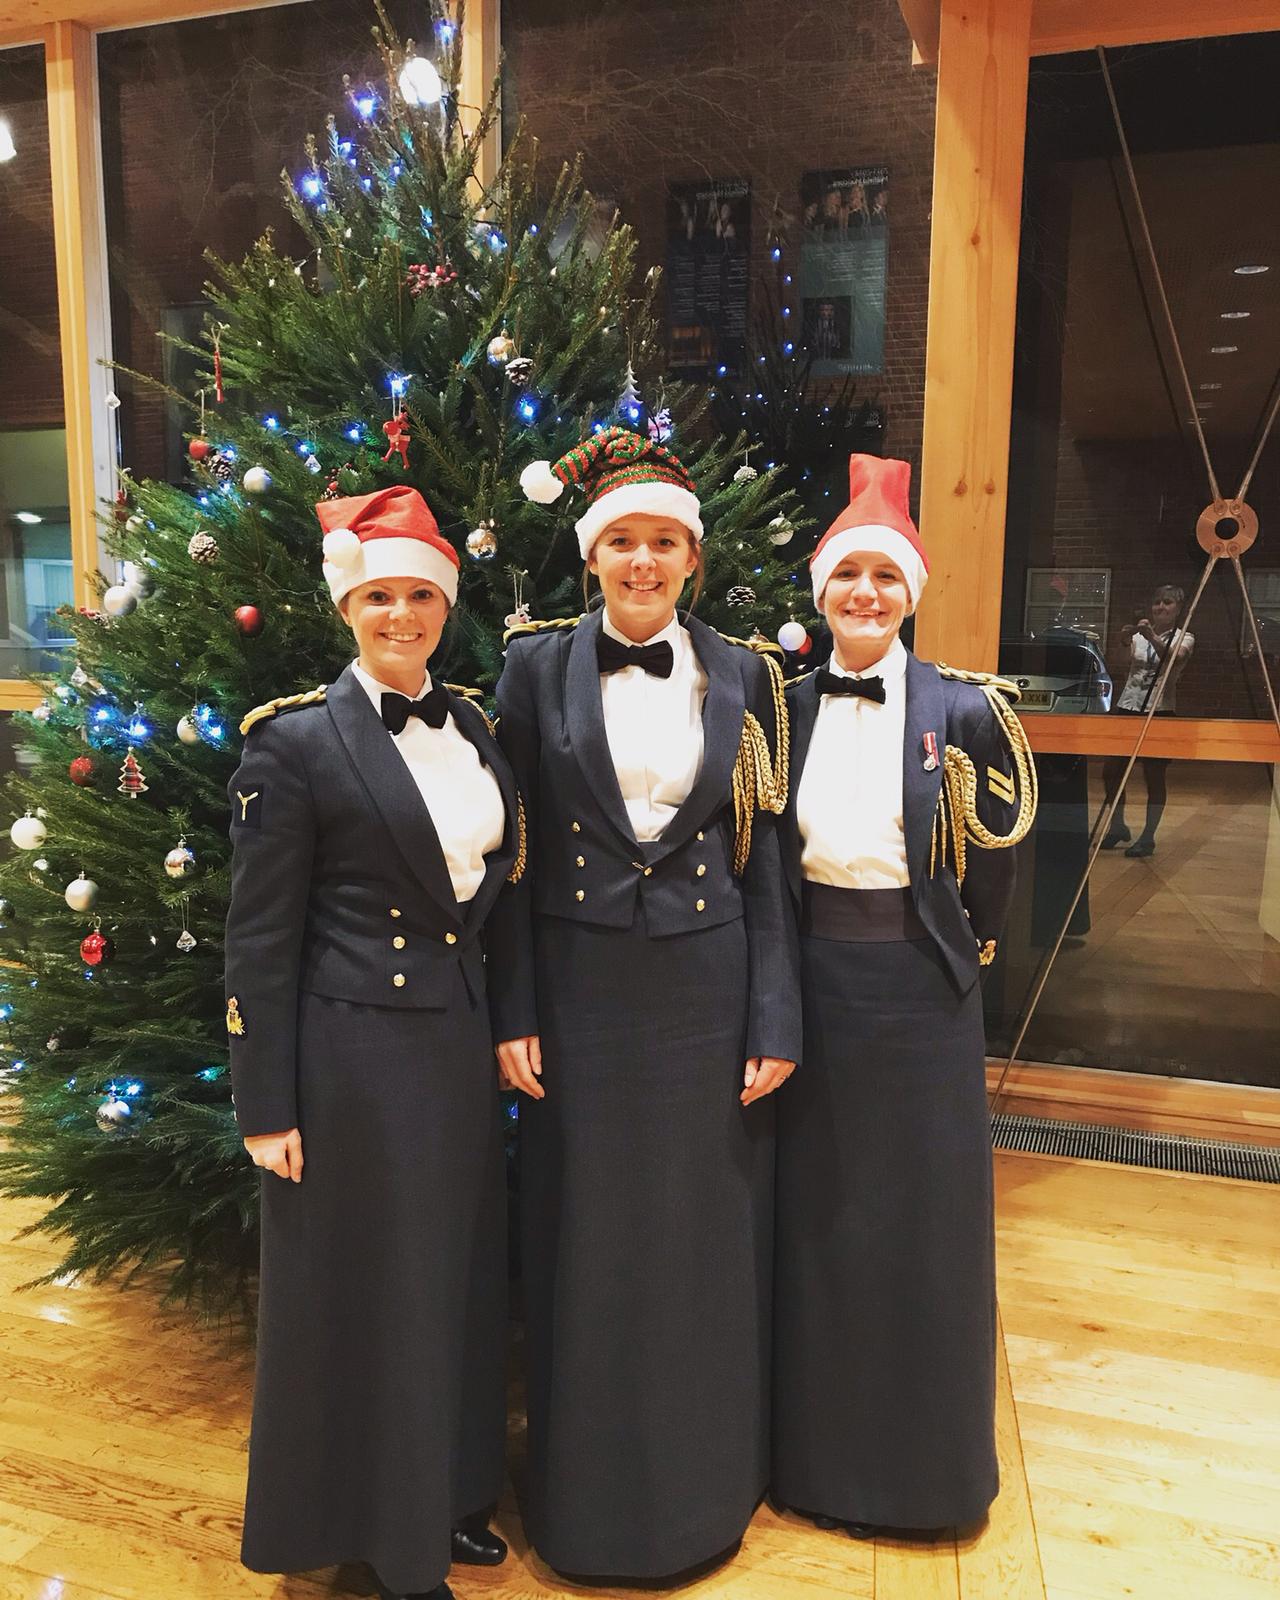 Three Musicians pose for the camera infront of a Christmas tree.